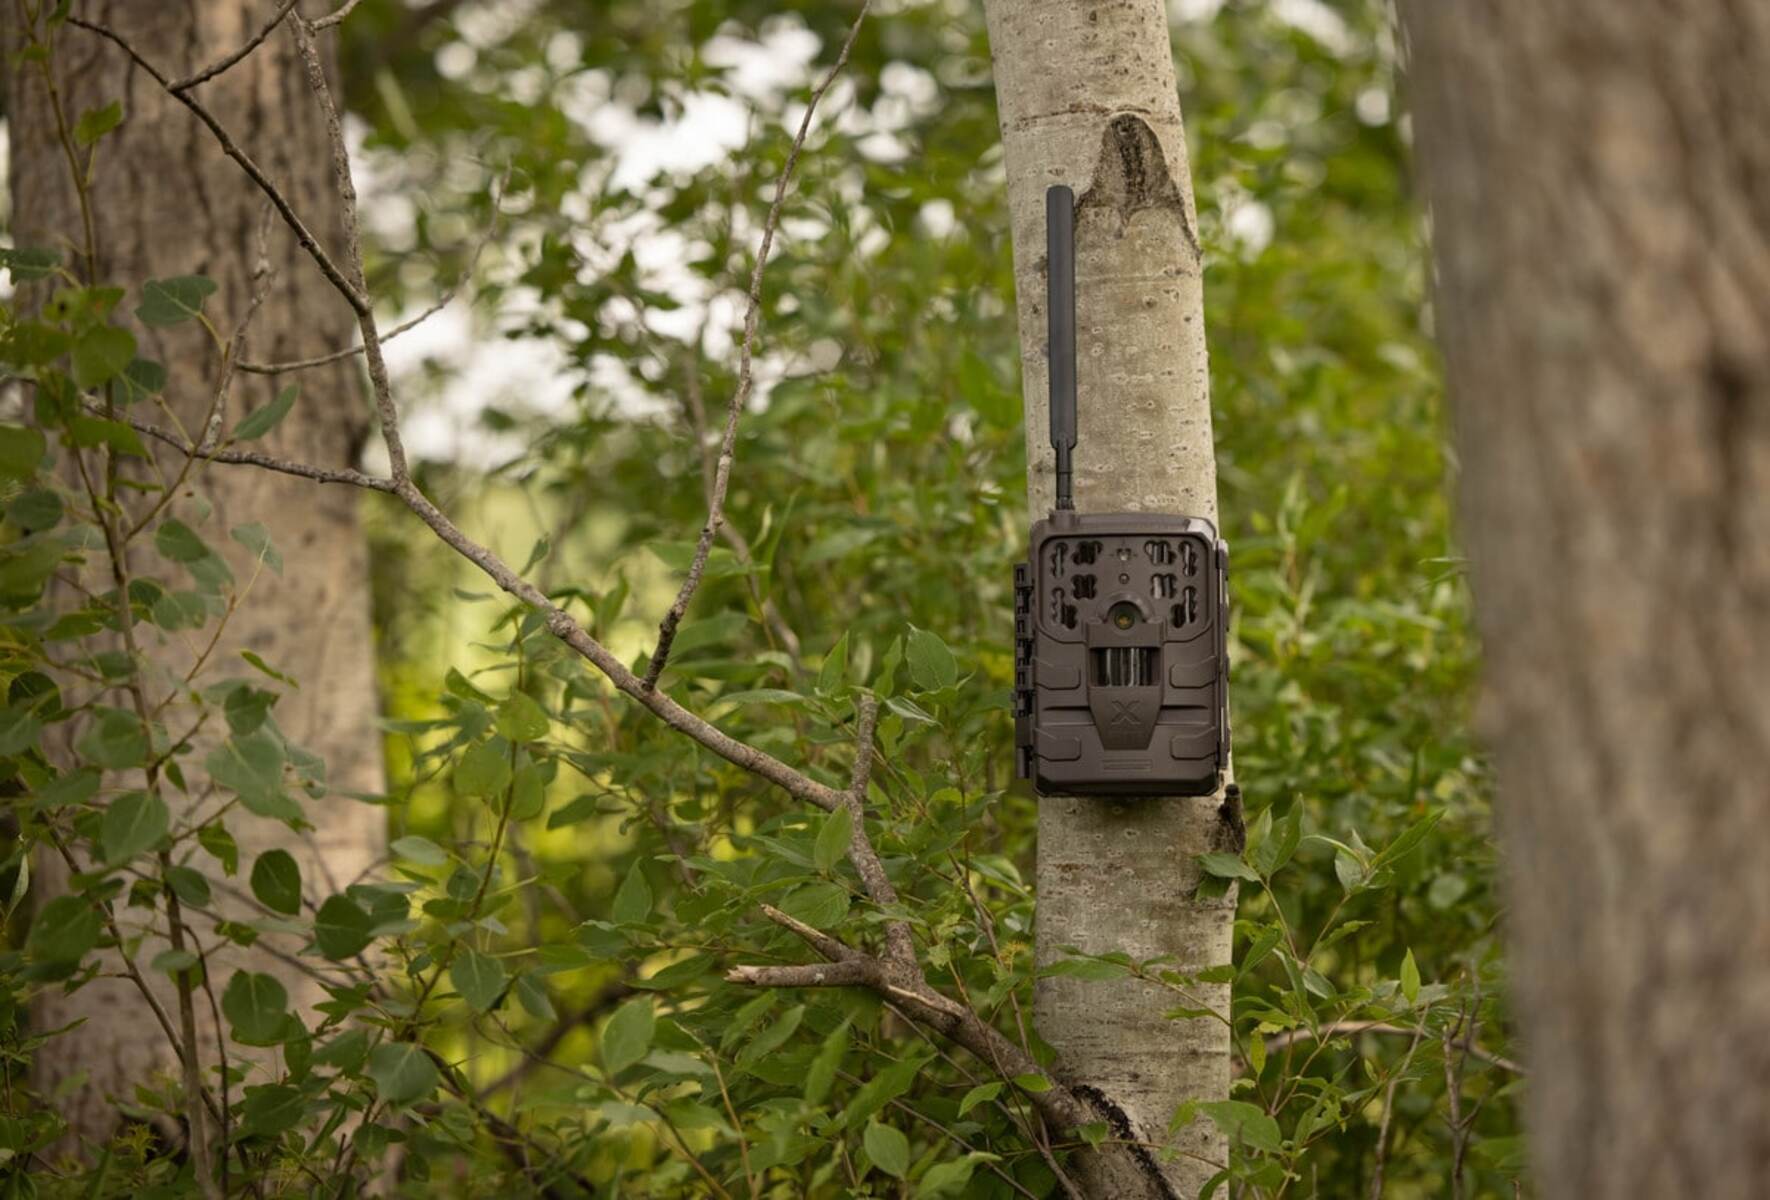 How To Hide A Trail Cam For Home Security